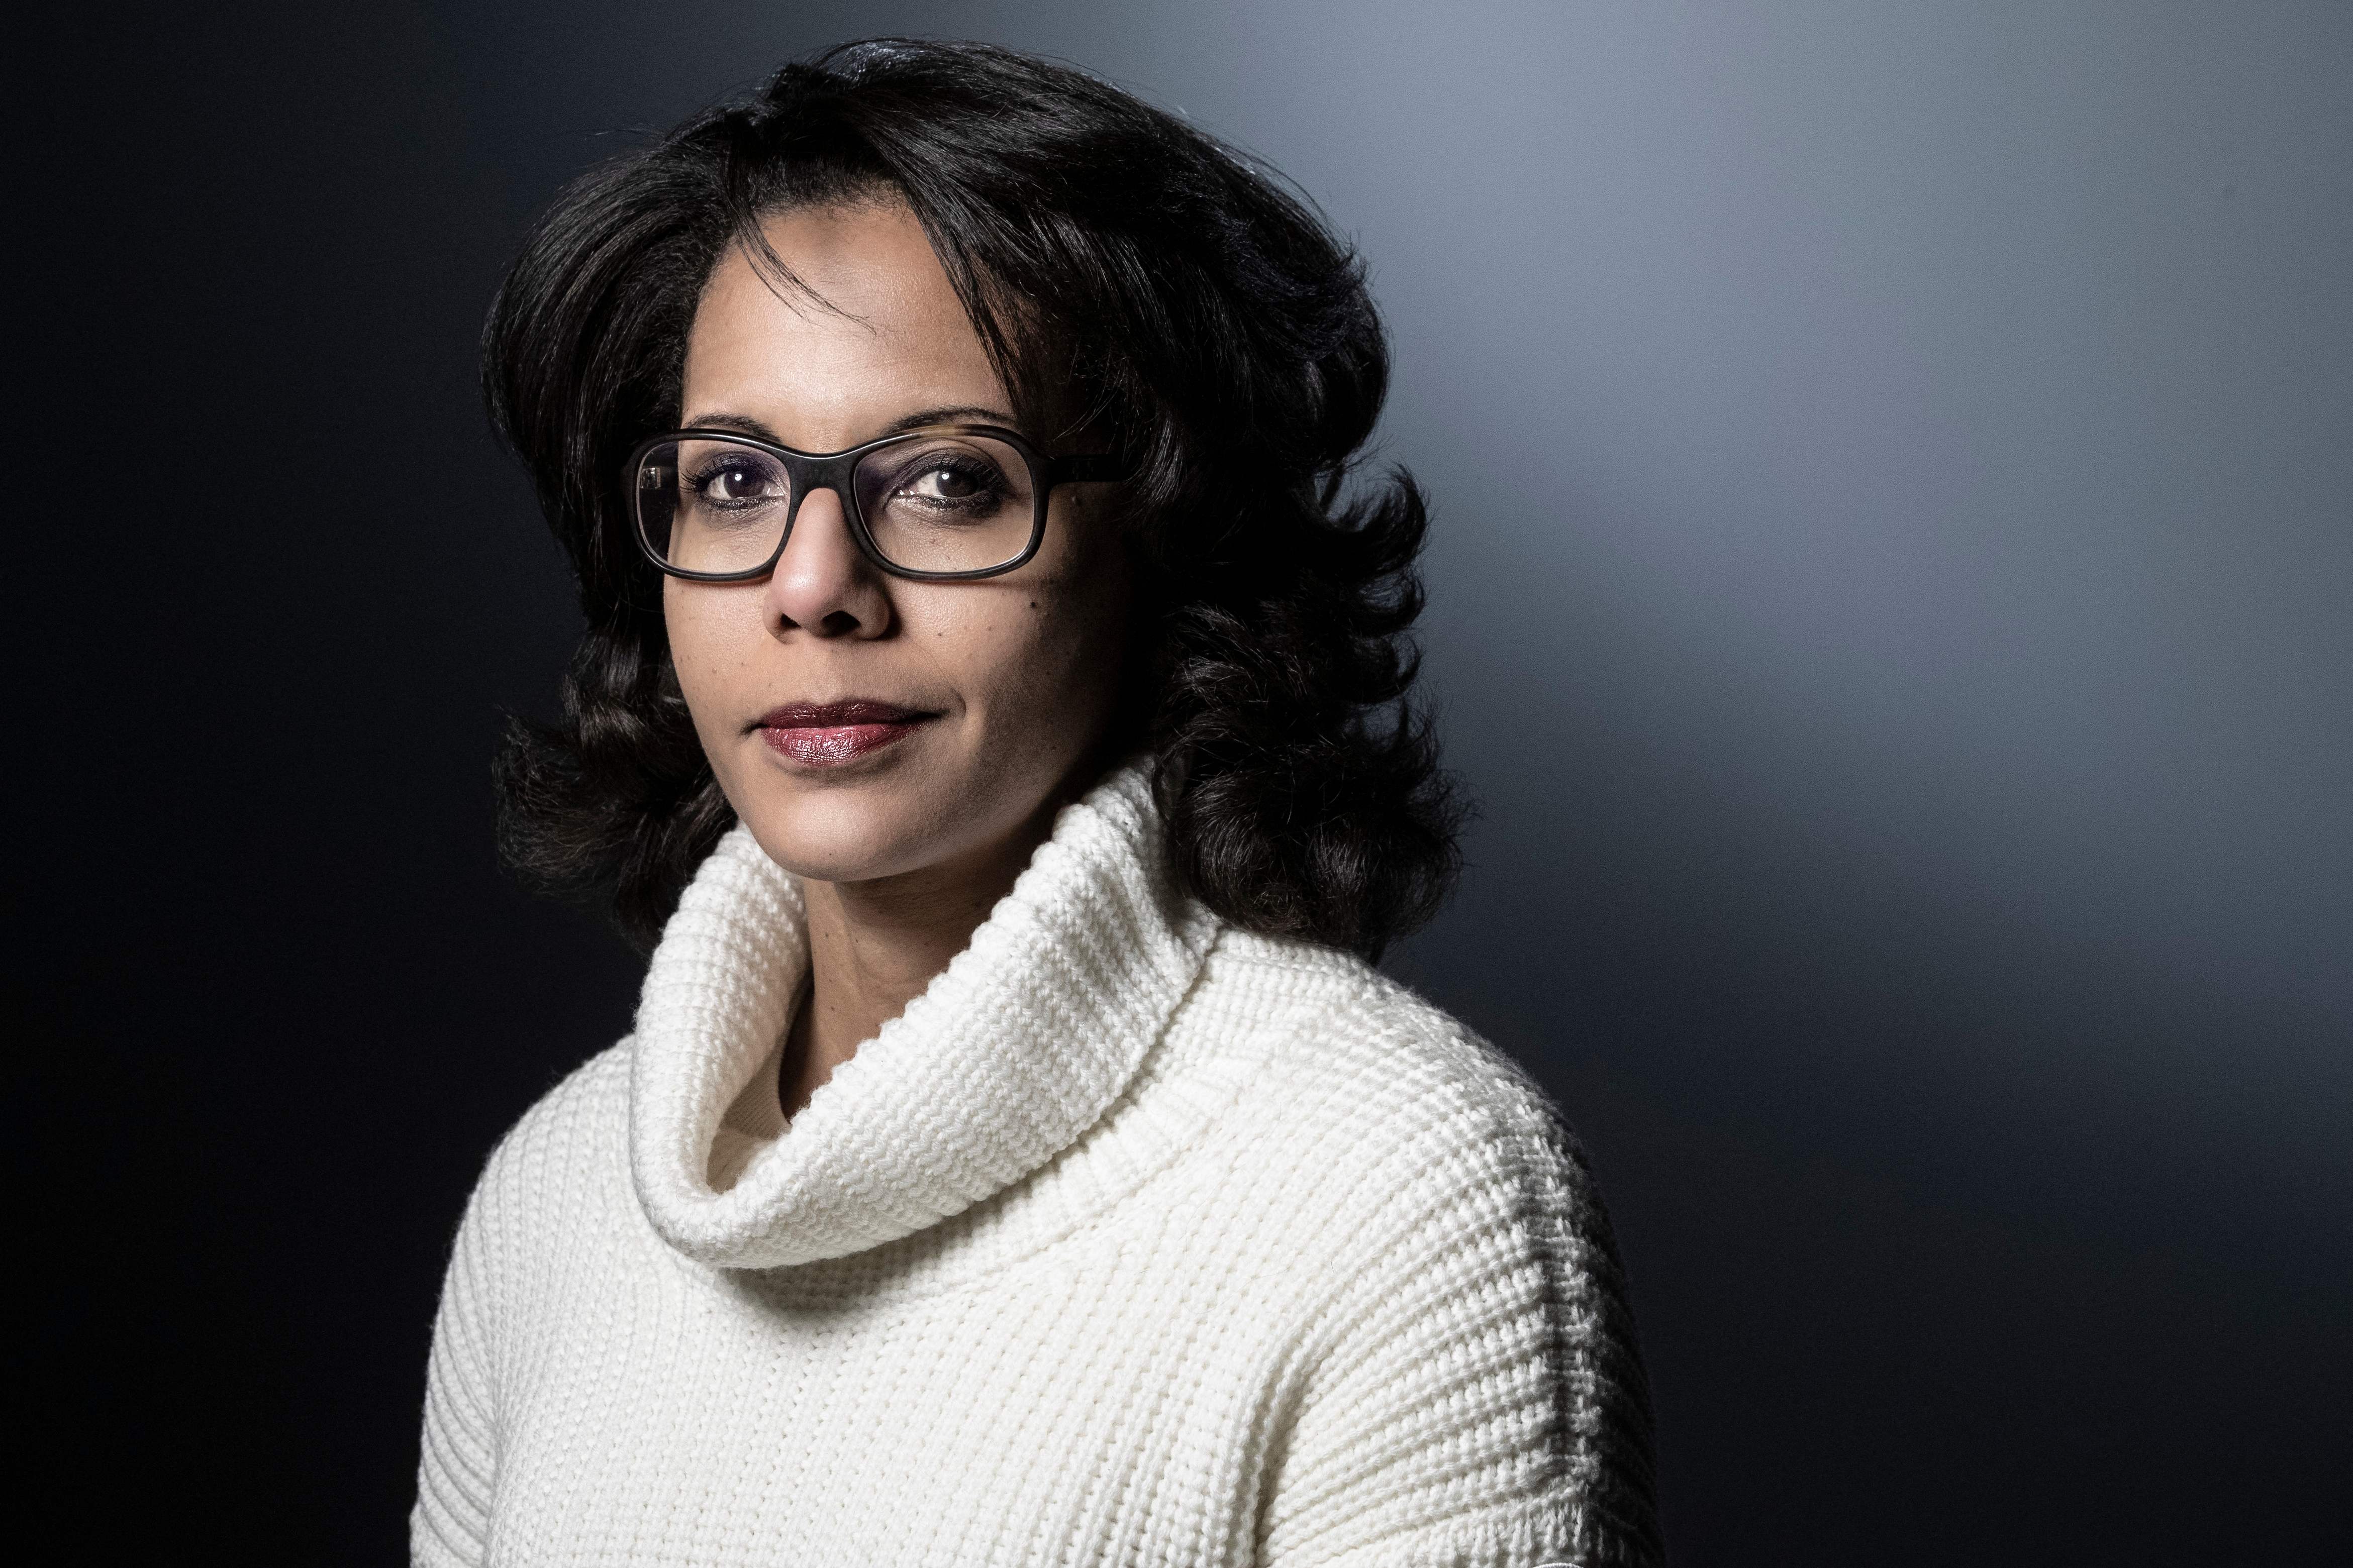 Audrey Pulvar, a Black French politician came under fire for saying that white people should “keep quiet” if allowed into a meeting of people of colour discussing racism